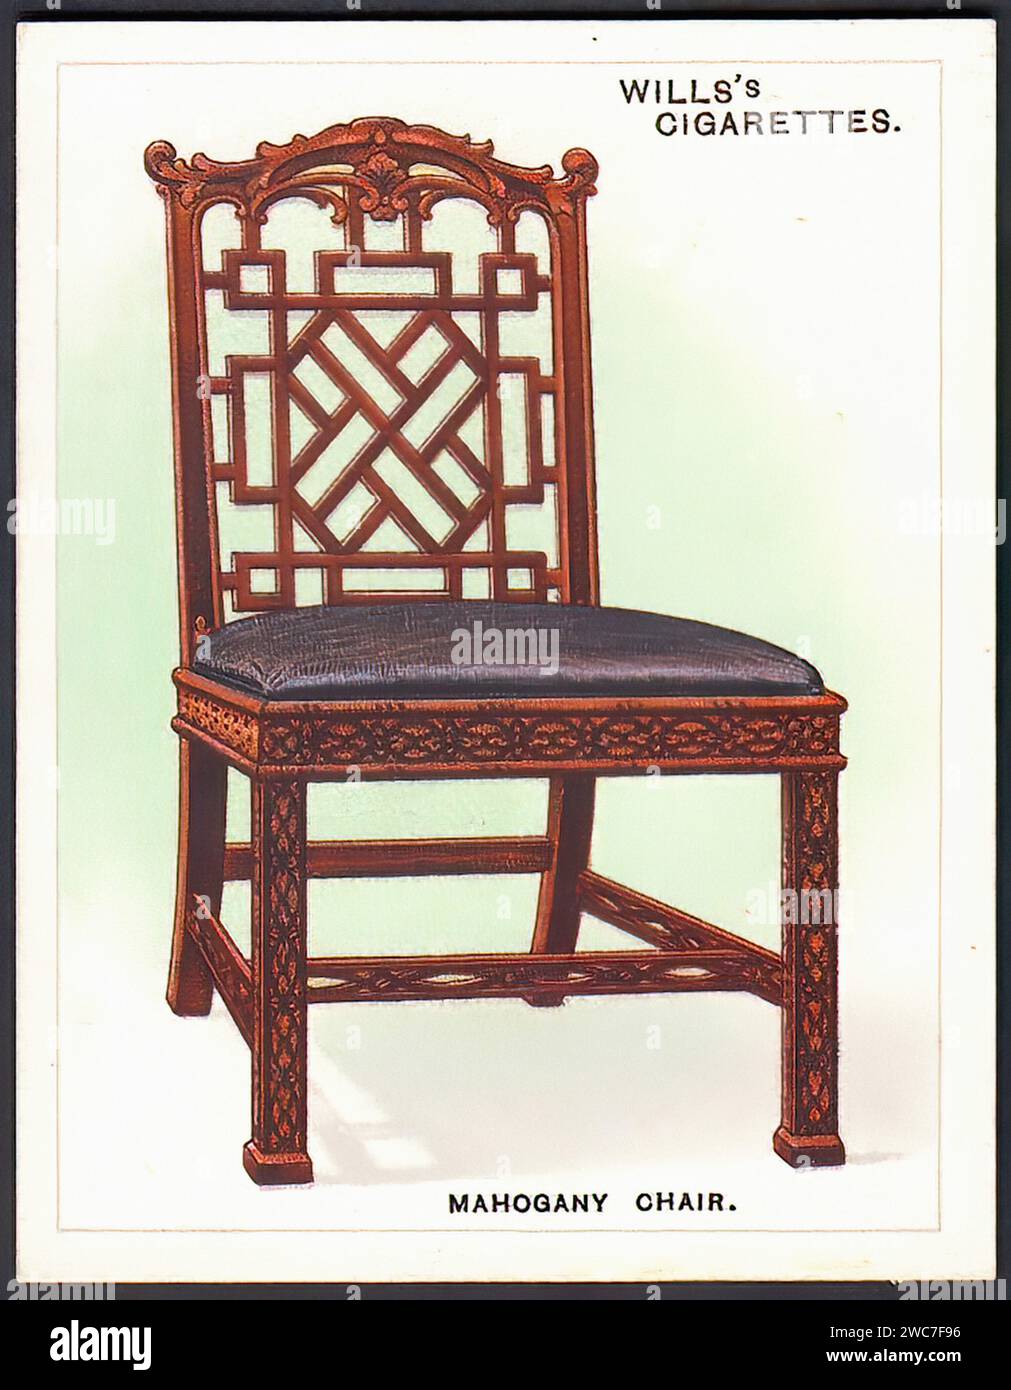 Chippendale mahogany chair 002 - Vintage Cigarette Card Illustration Stock Photo